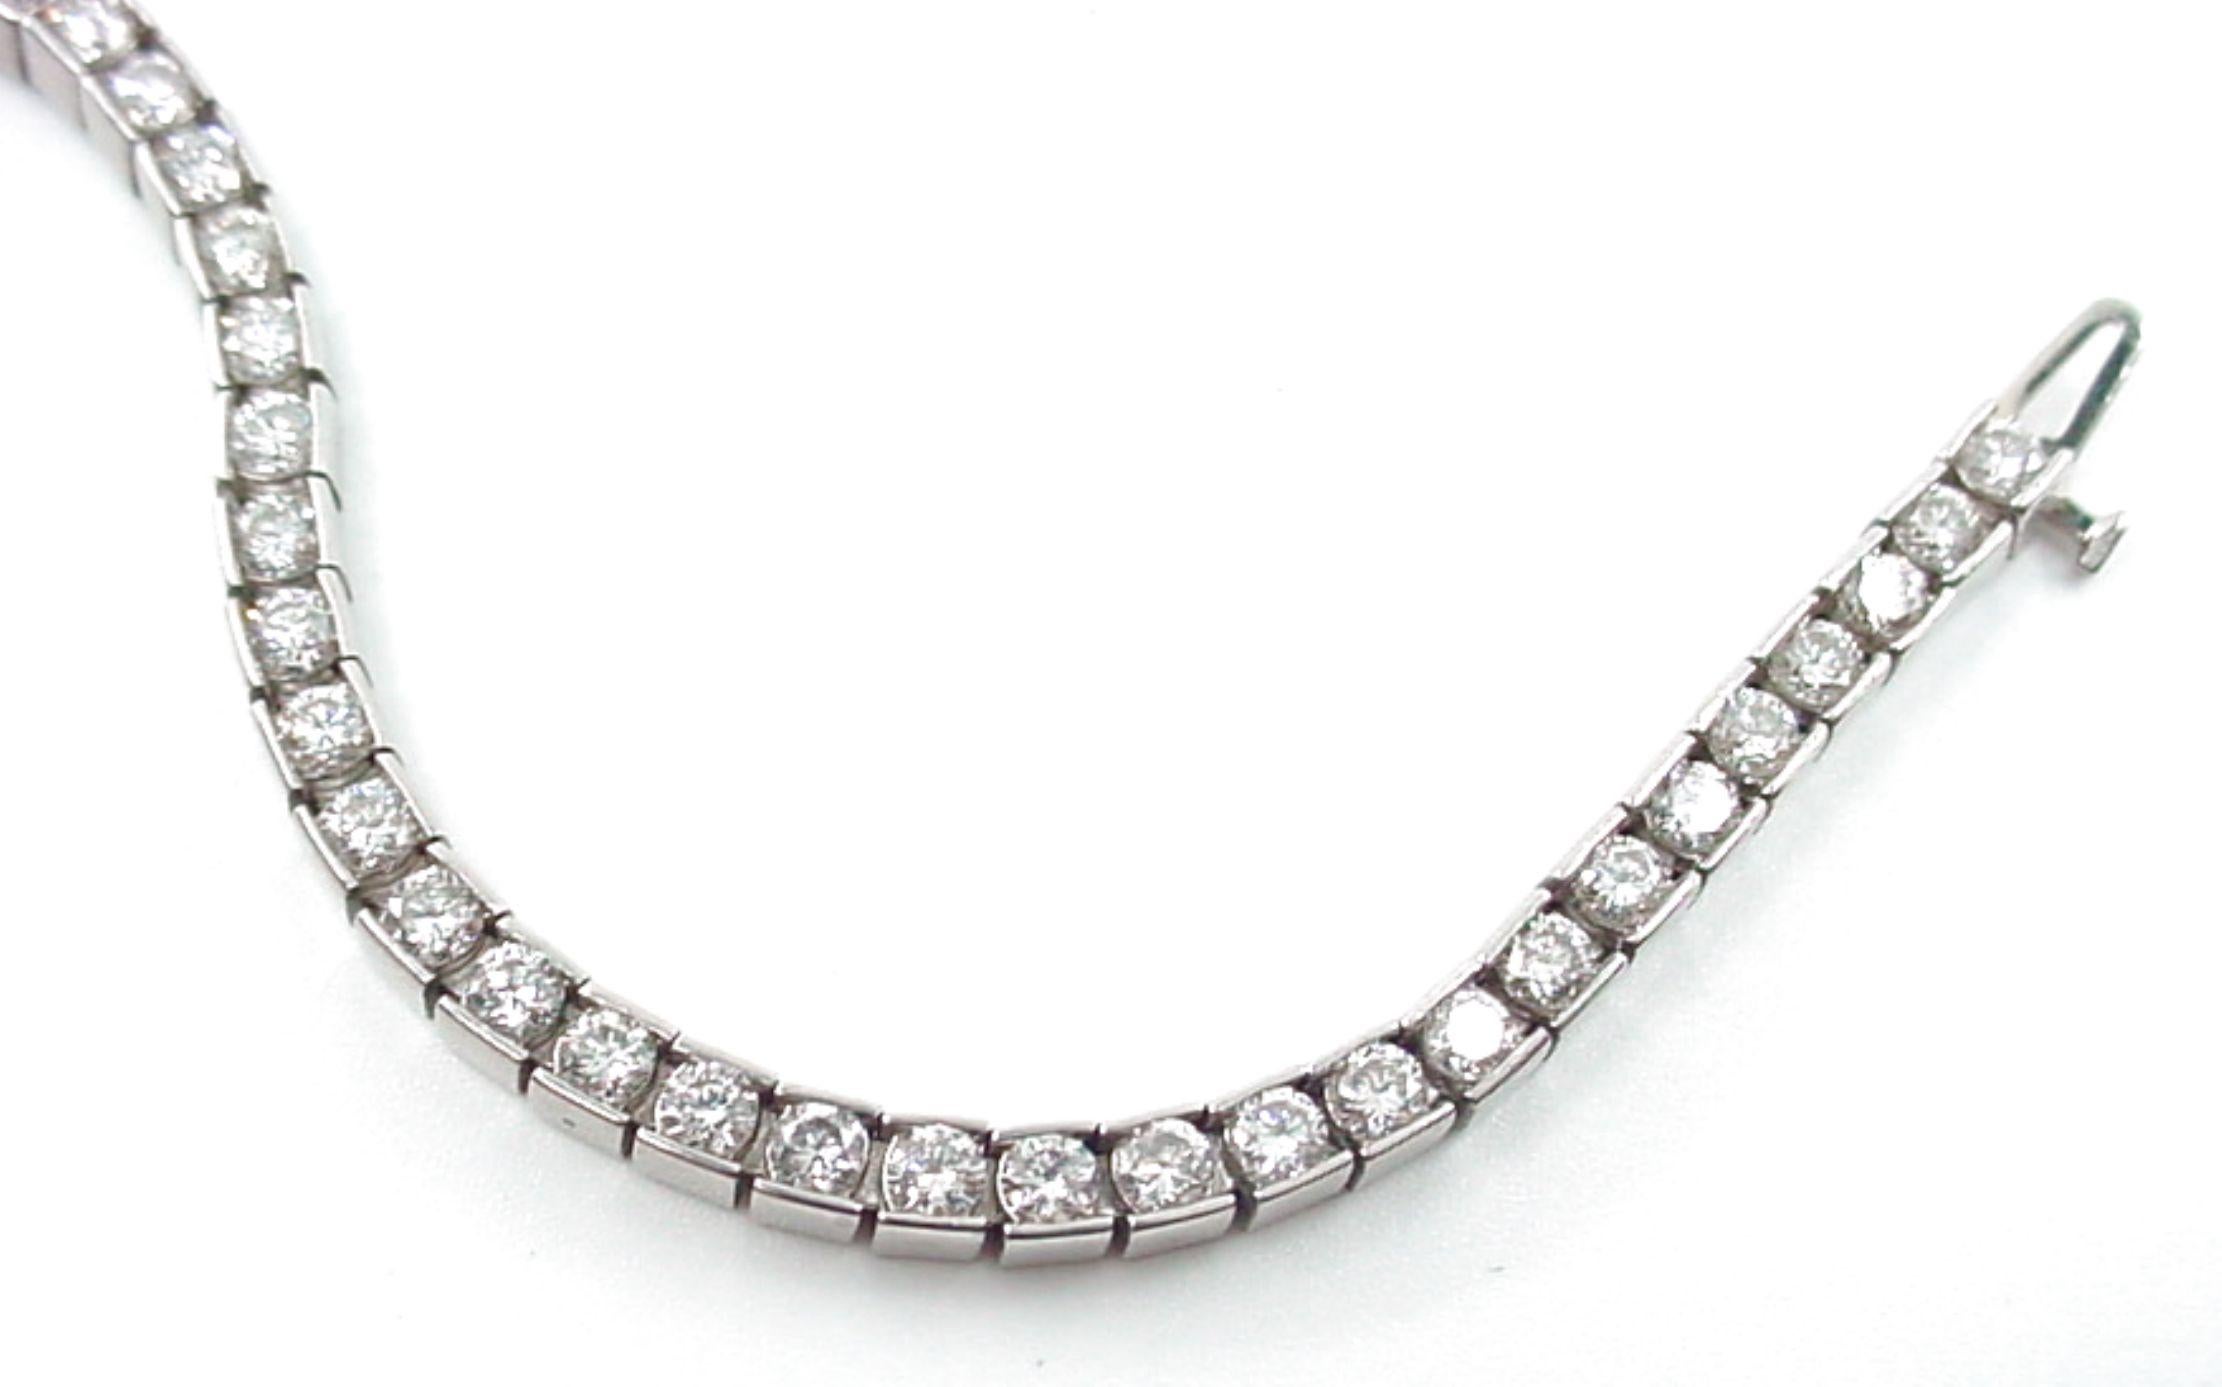 Luxurious 5.00 Ct. Natural Diamond Platinum Straight Line Tennis Bracelet In Good Condition For Sale In Santa Rosa, CA